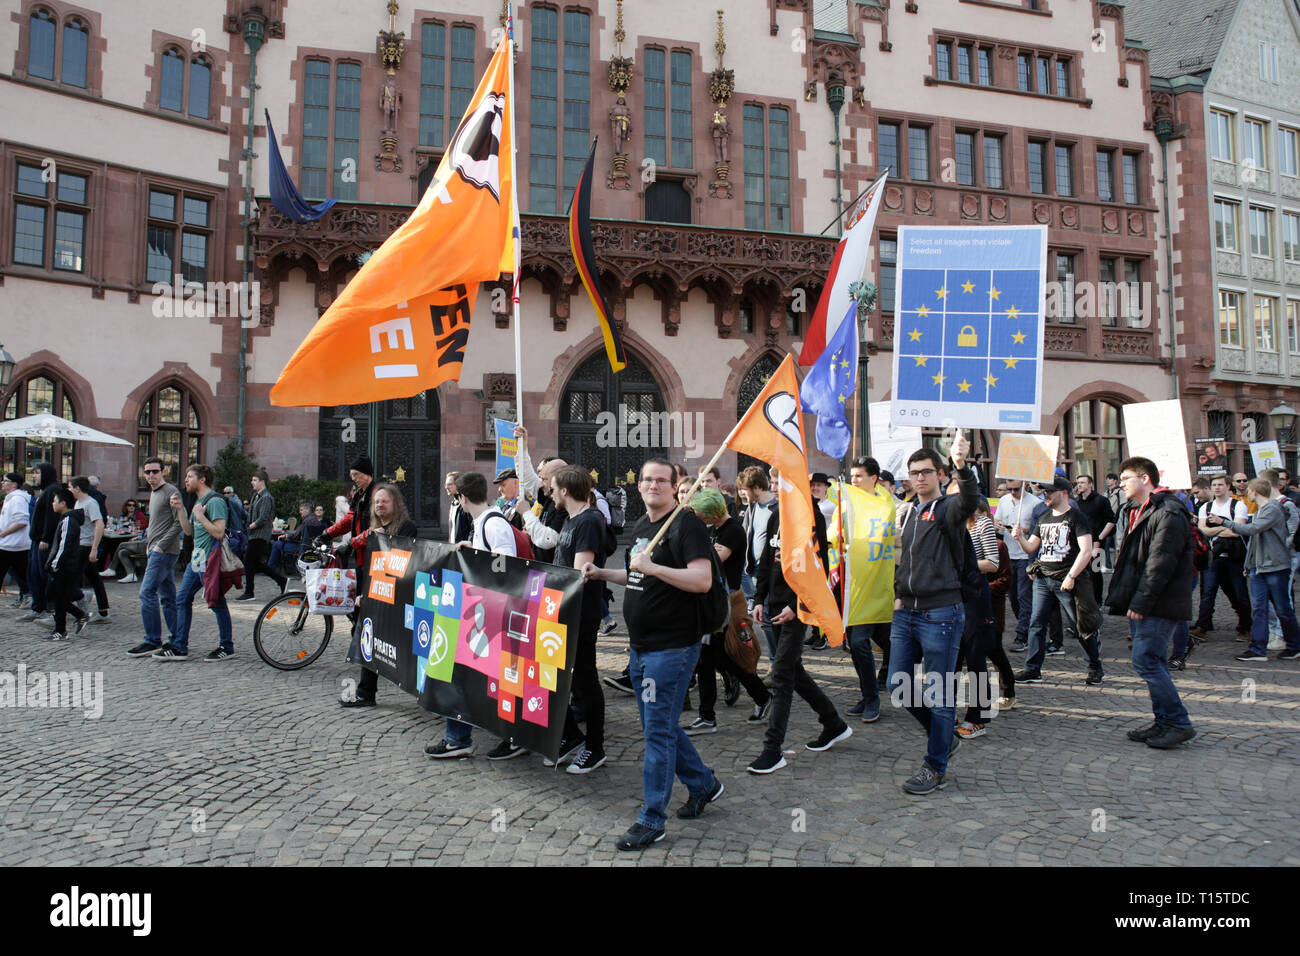 Frankfurt, Germany. 23rd March 2019. Protesters march with signs through Frankfurt. More than 15,000 protesters marched through Frankfurt calling for the Internet to remain free and to not to pass the new EU Copyright Directive into law. The protest was part of a Germany wide day of protest against the EU directive. Stock Photo